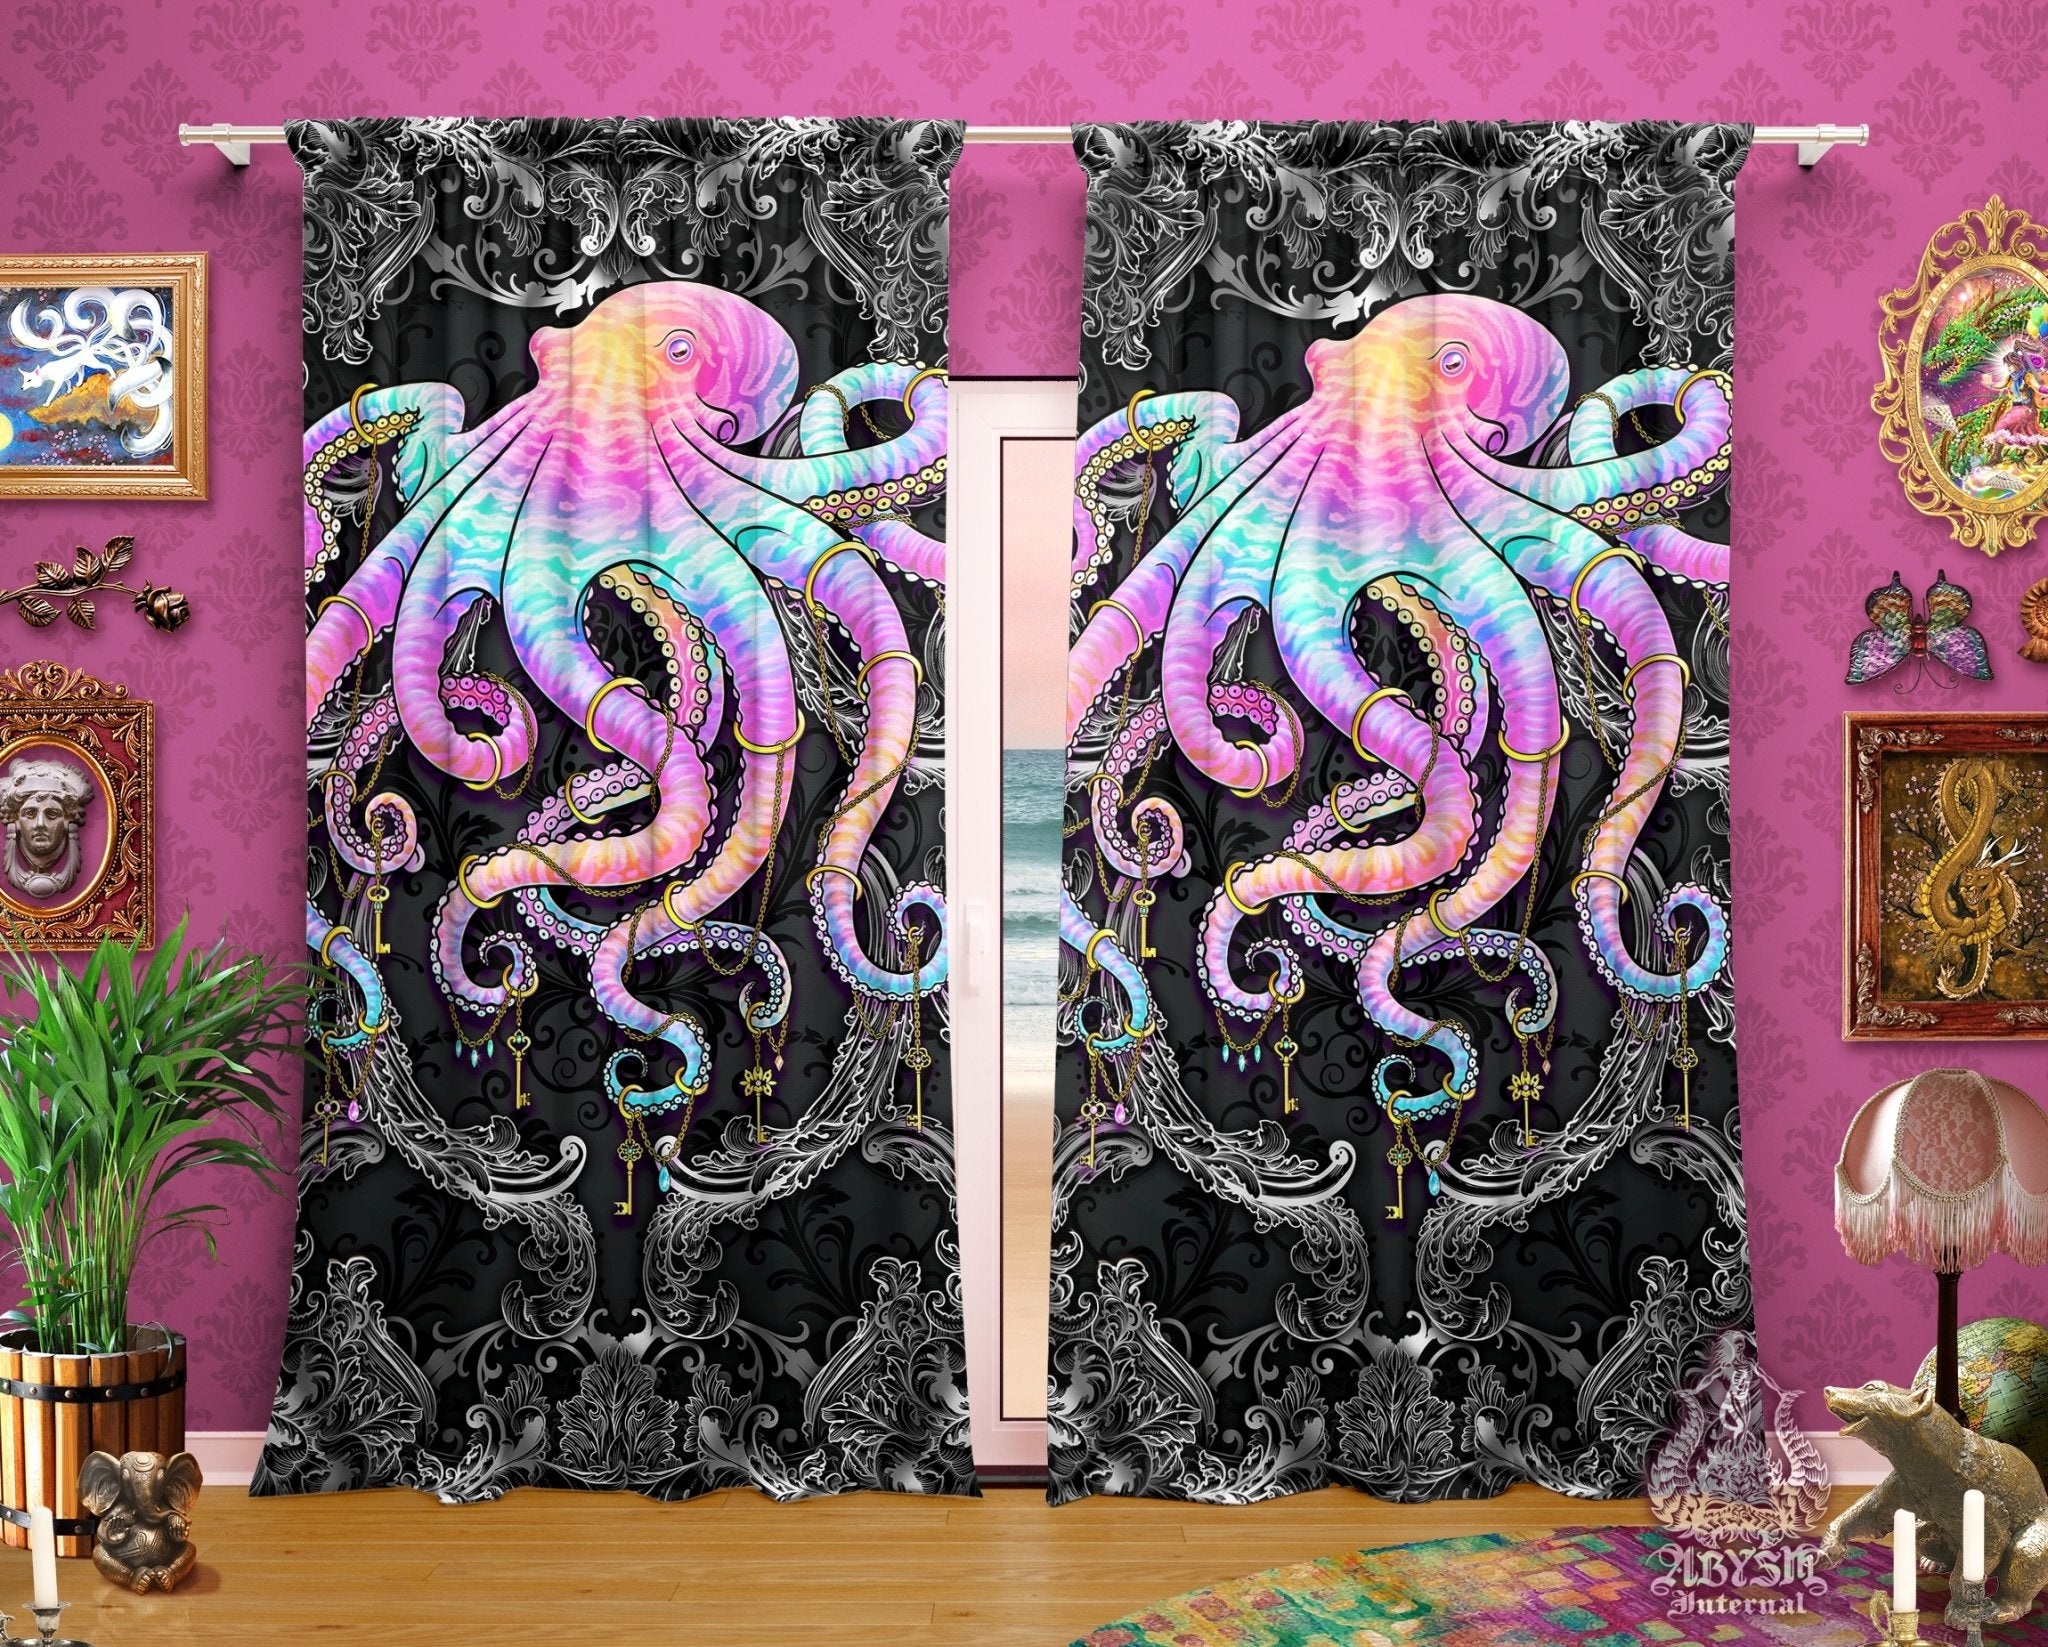 Octopus Blackout Curtains, Long Window Panels, Psychedelic Art Print, Aesthetic Room Decor, Funky and Eclectic Home Decor - Dark Pastel Punk - Abysm Internal